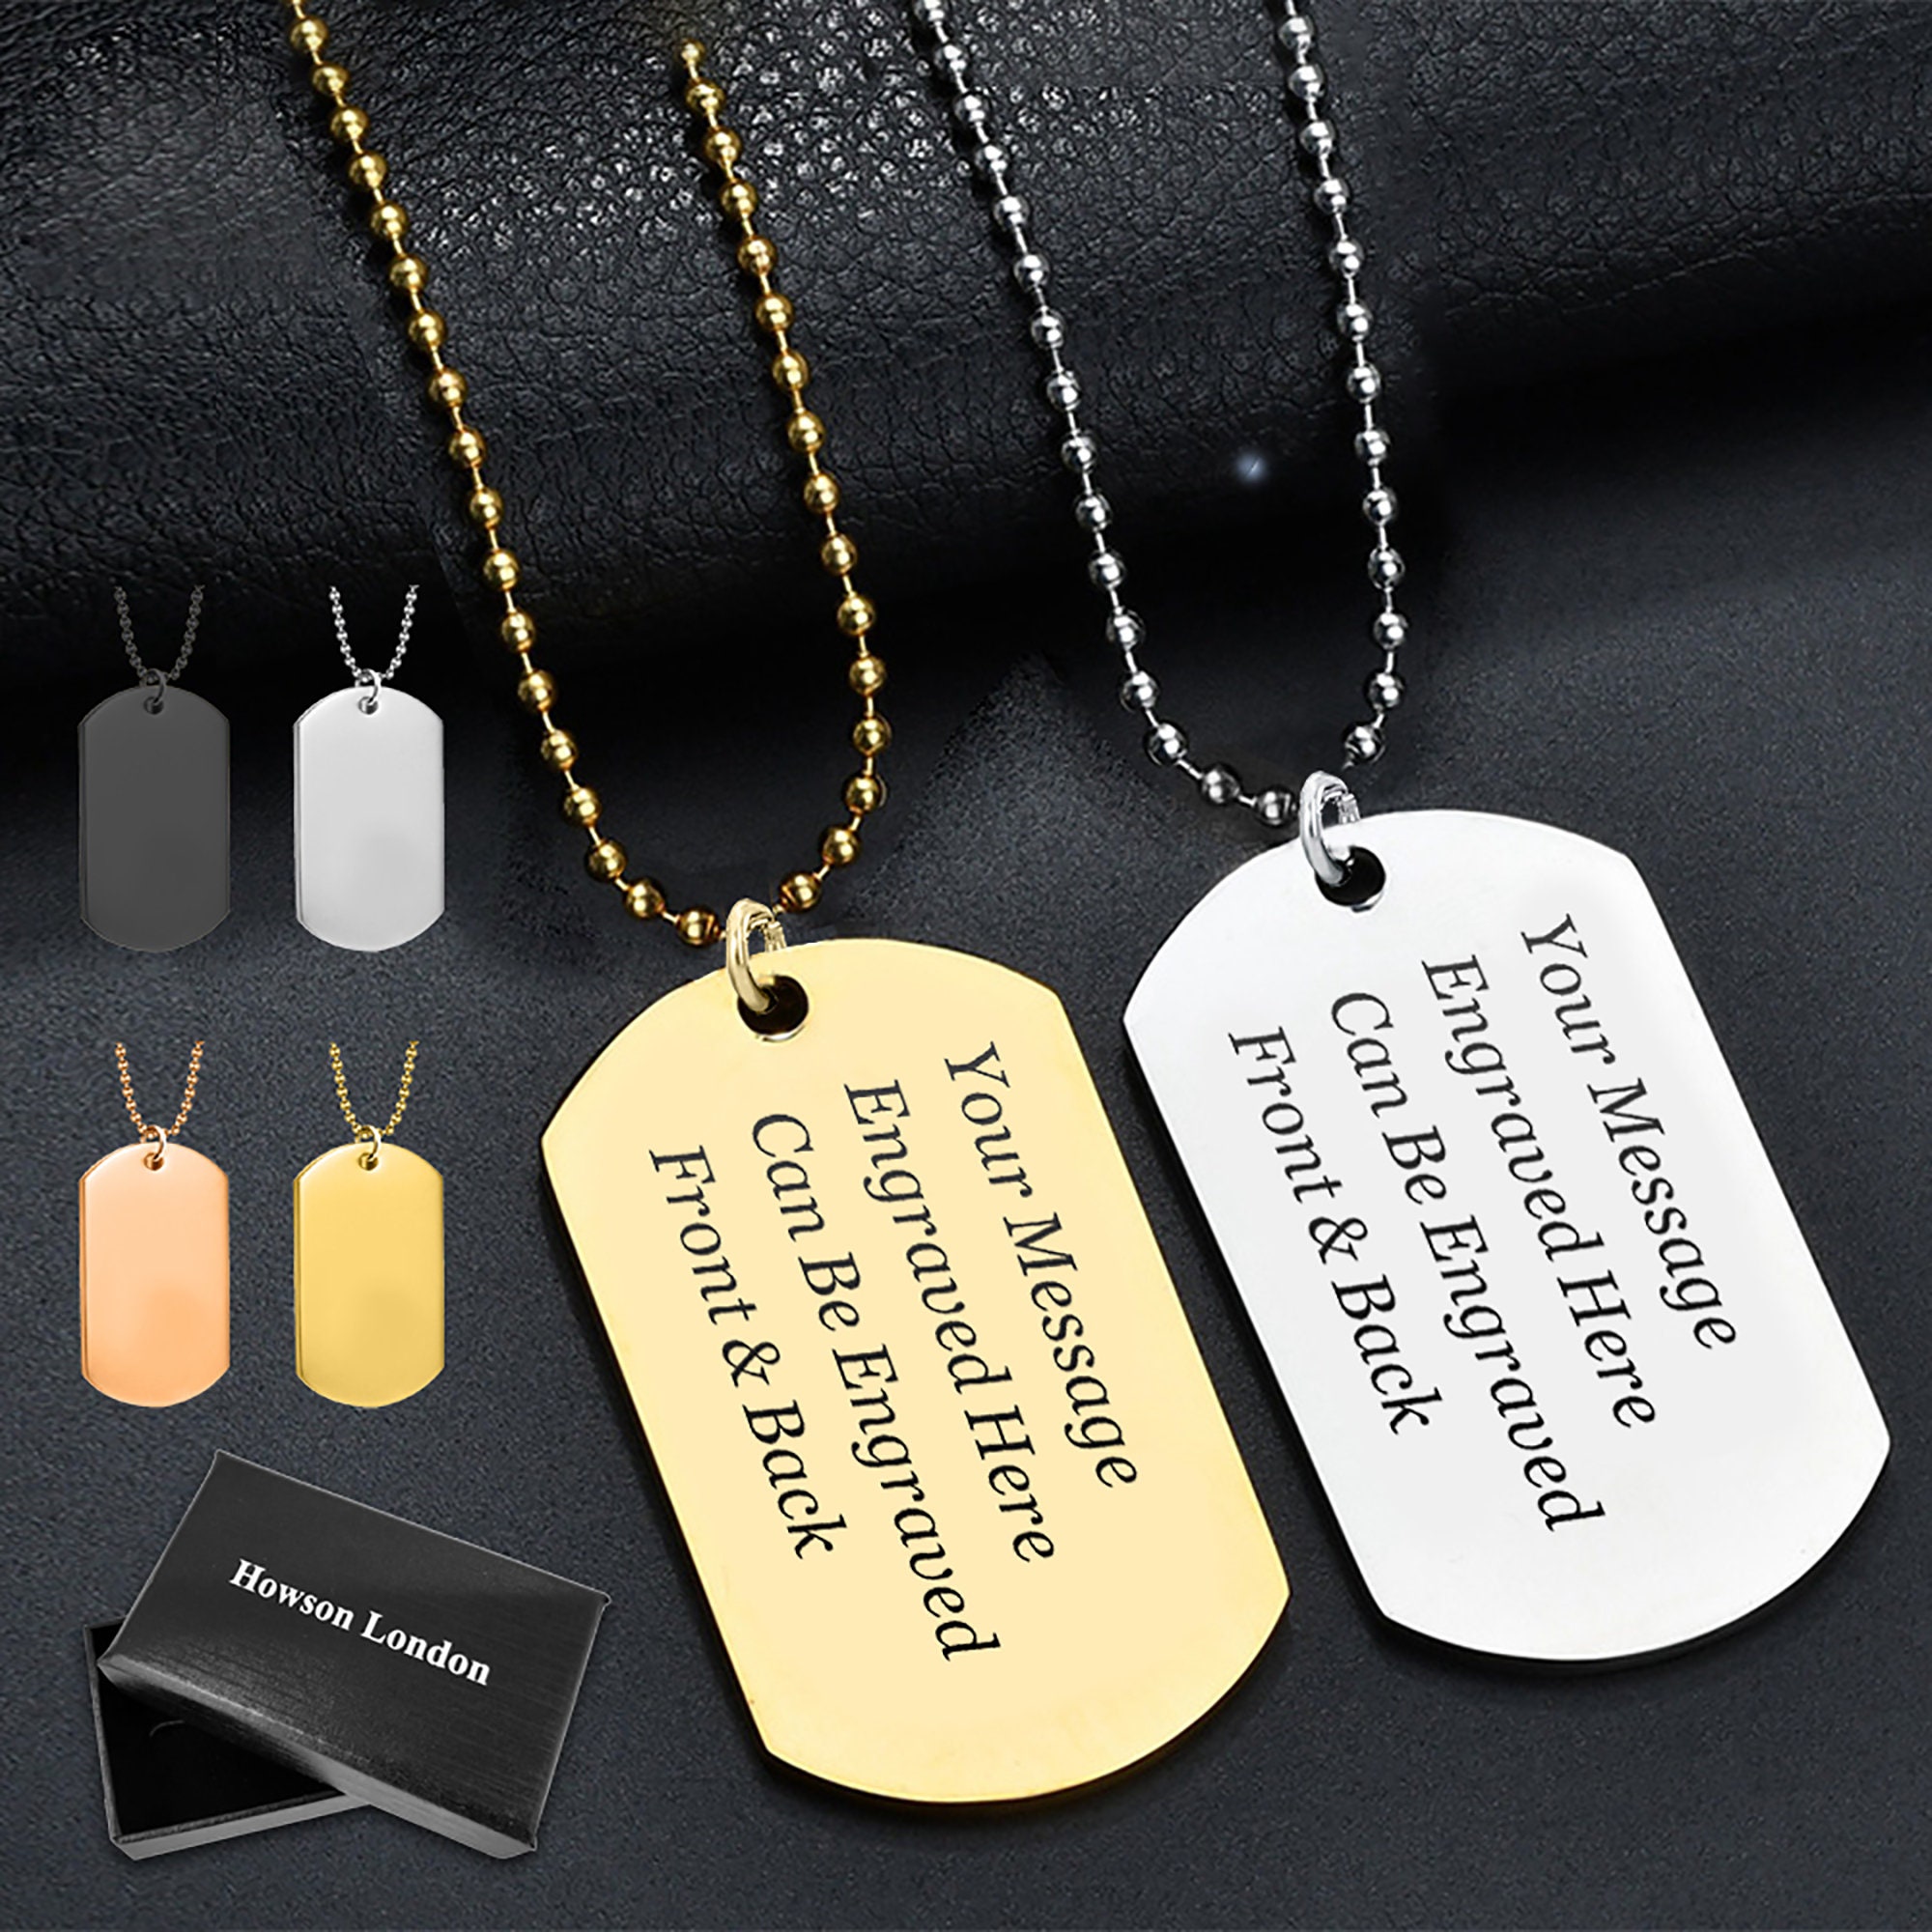 Personalized Engraved Dog Tag Necklace Army Card Identity 